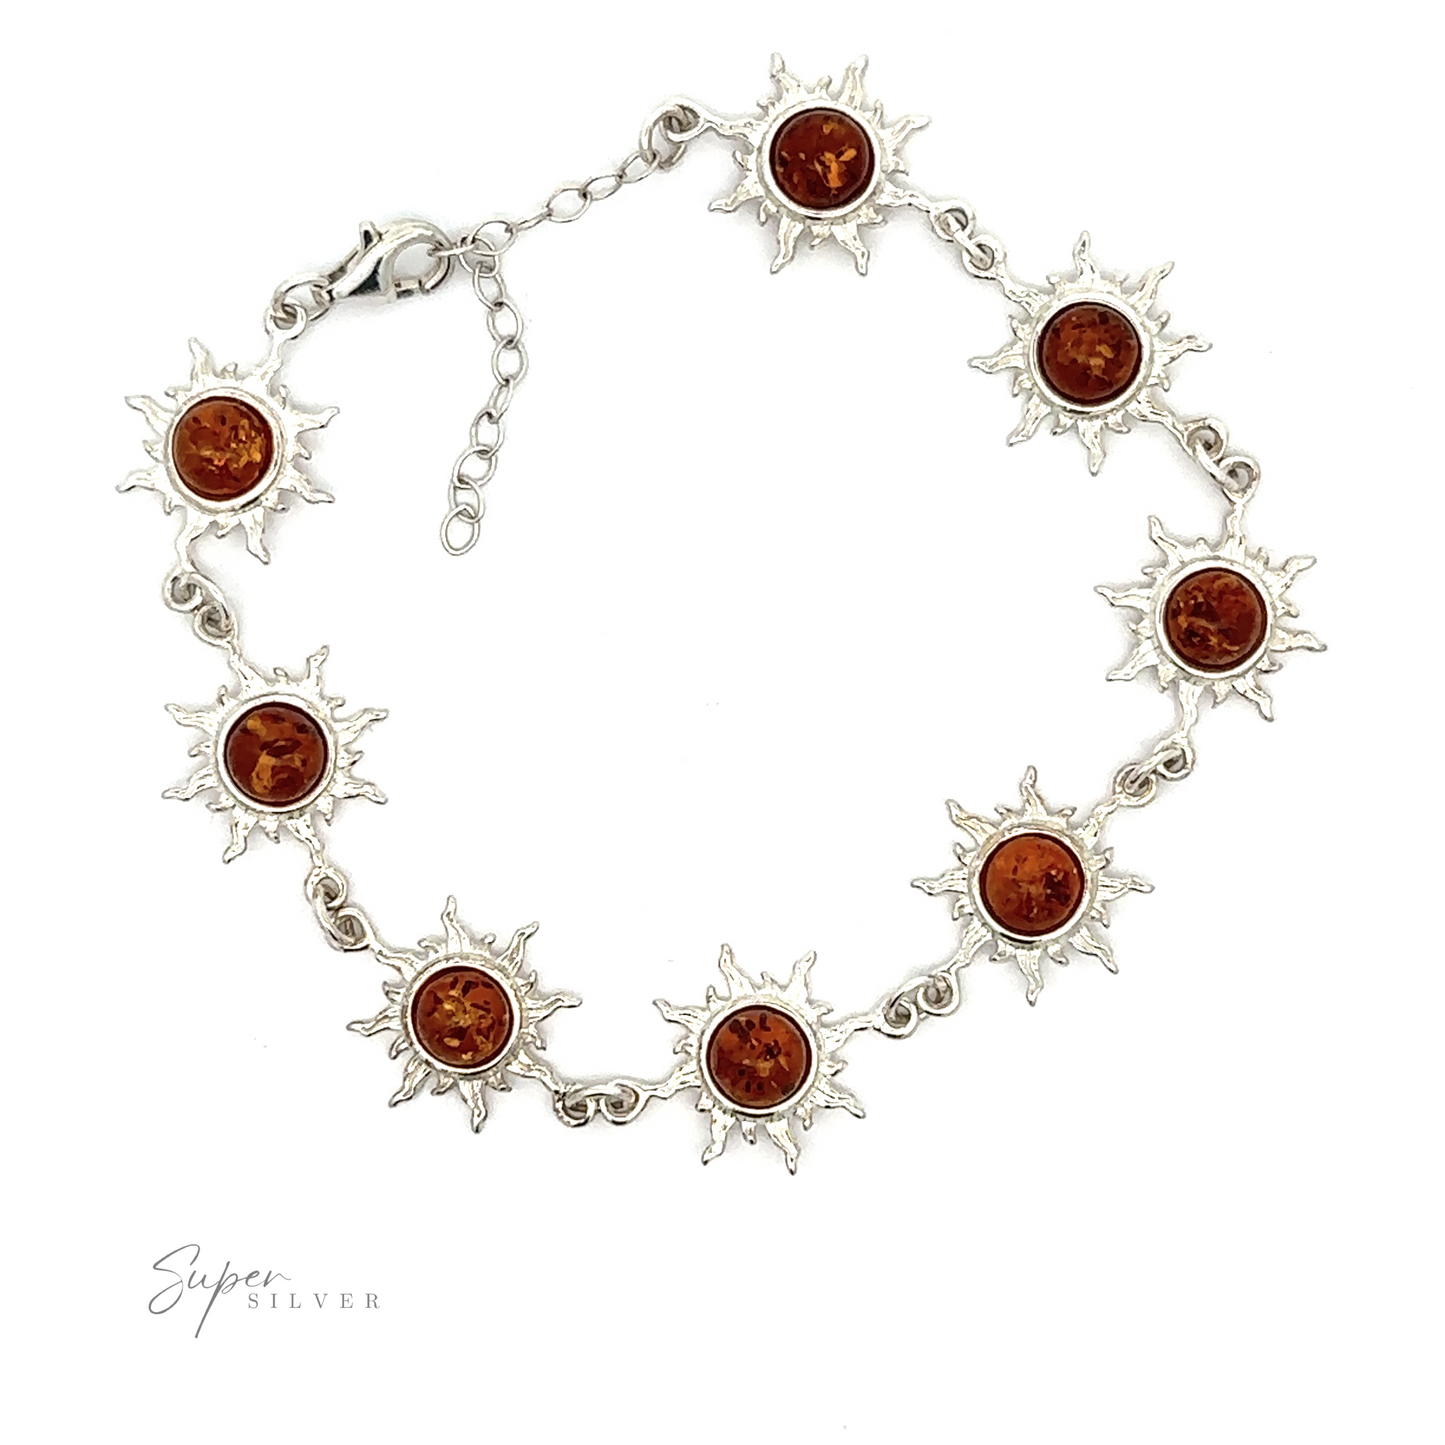 A sterling silver bracelet featuring small sun-shaped links, each with a round cognac amber gemstone at the center. This Sparkling Amber Sun Bracelet has an adjustable chain clasp.